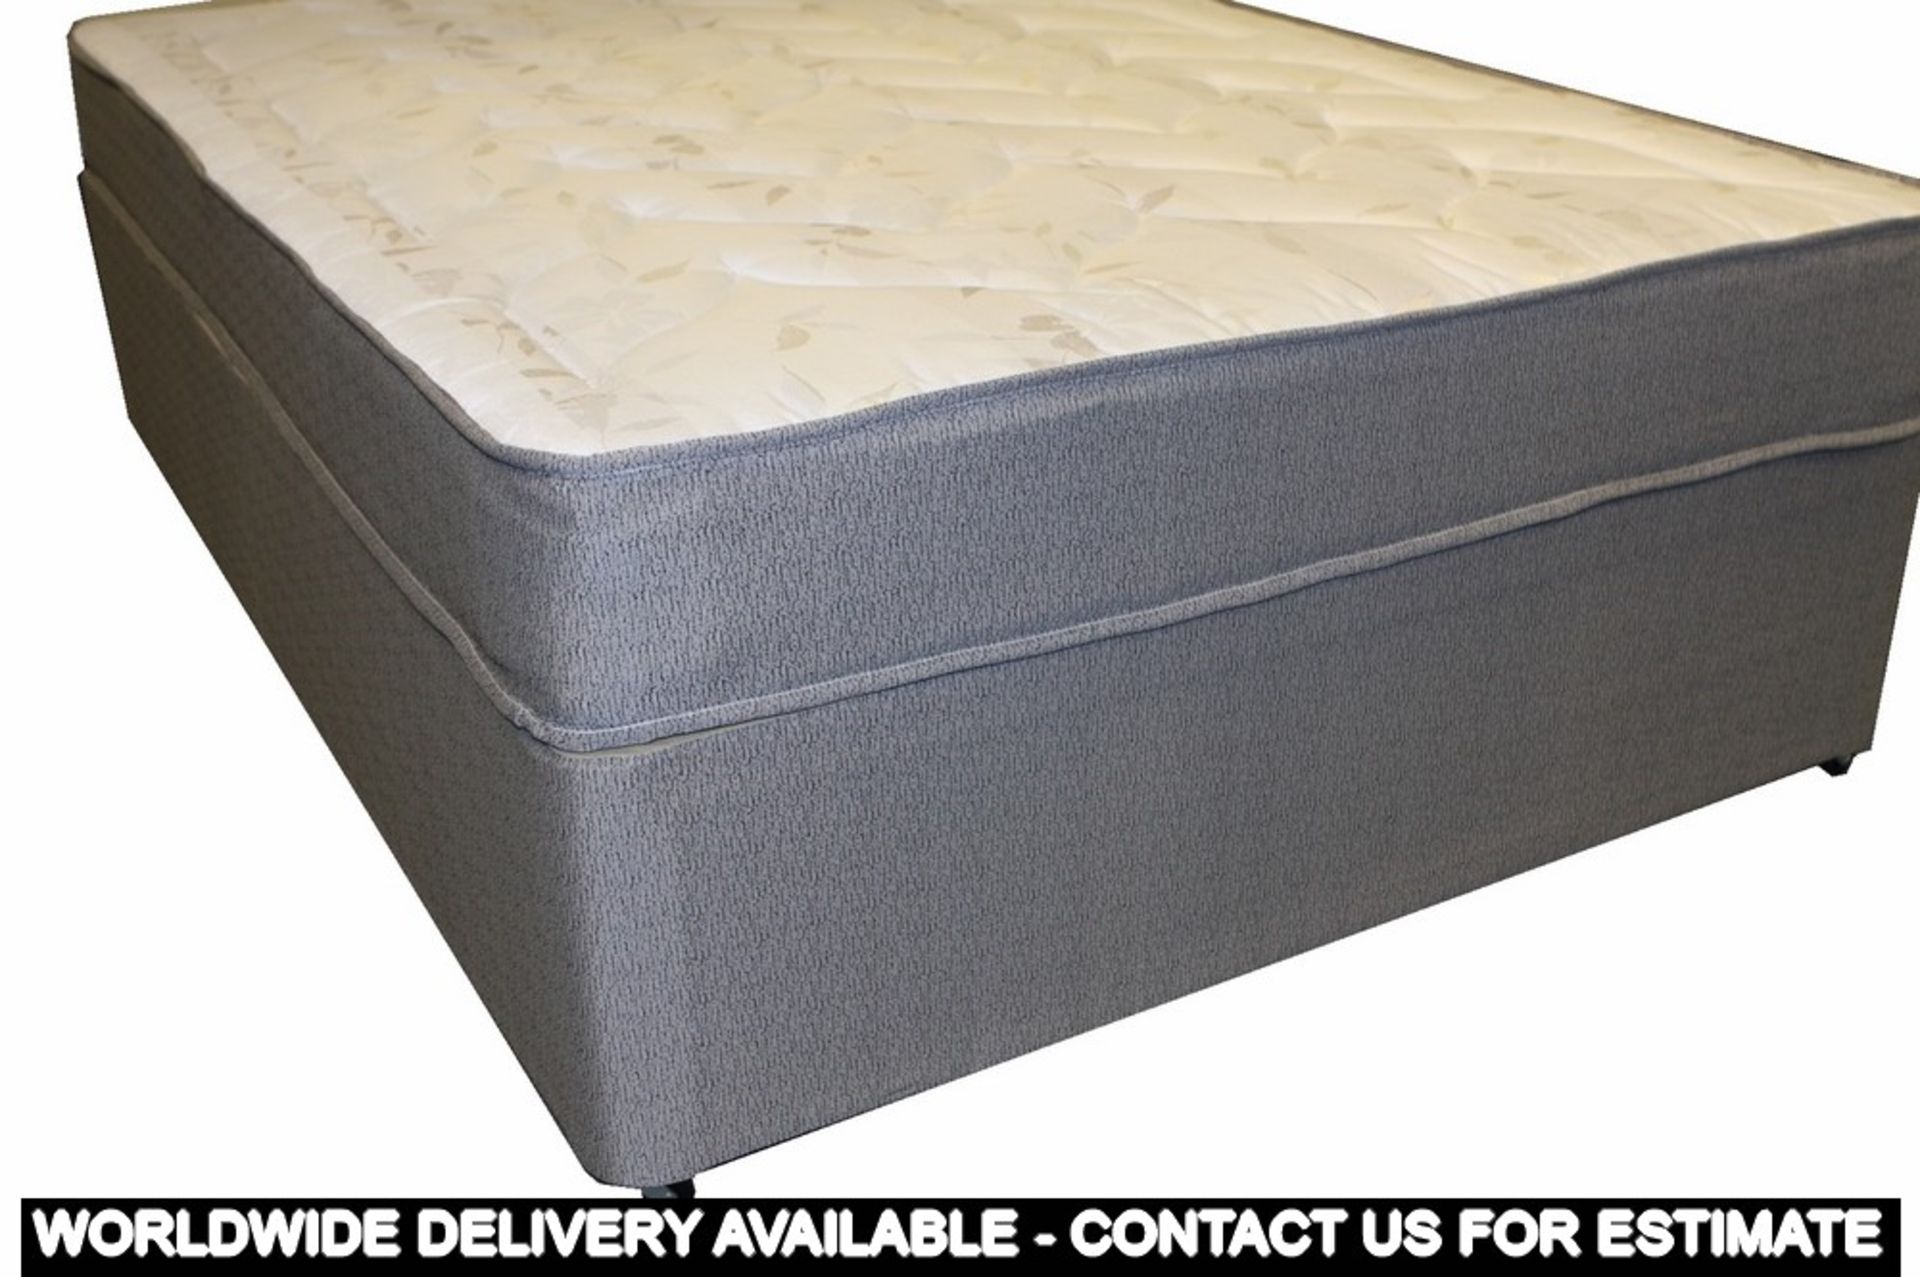 2ft6 Comfy Sprung Divan Bed with two storage drawers (sd16a+sdb5aa)